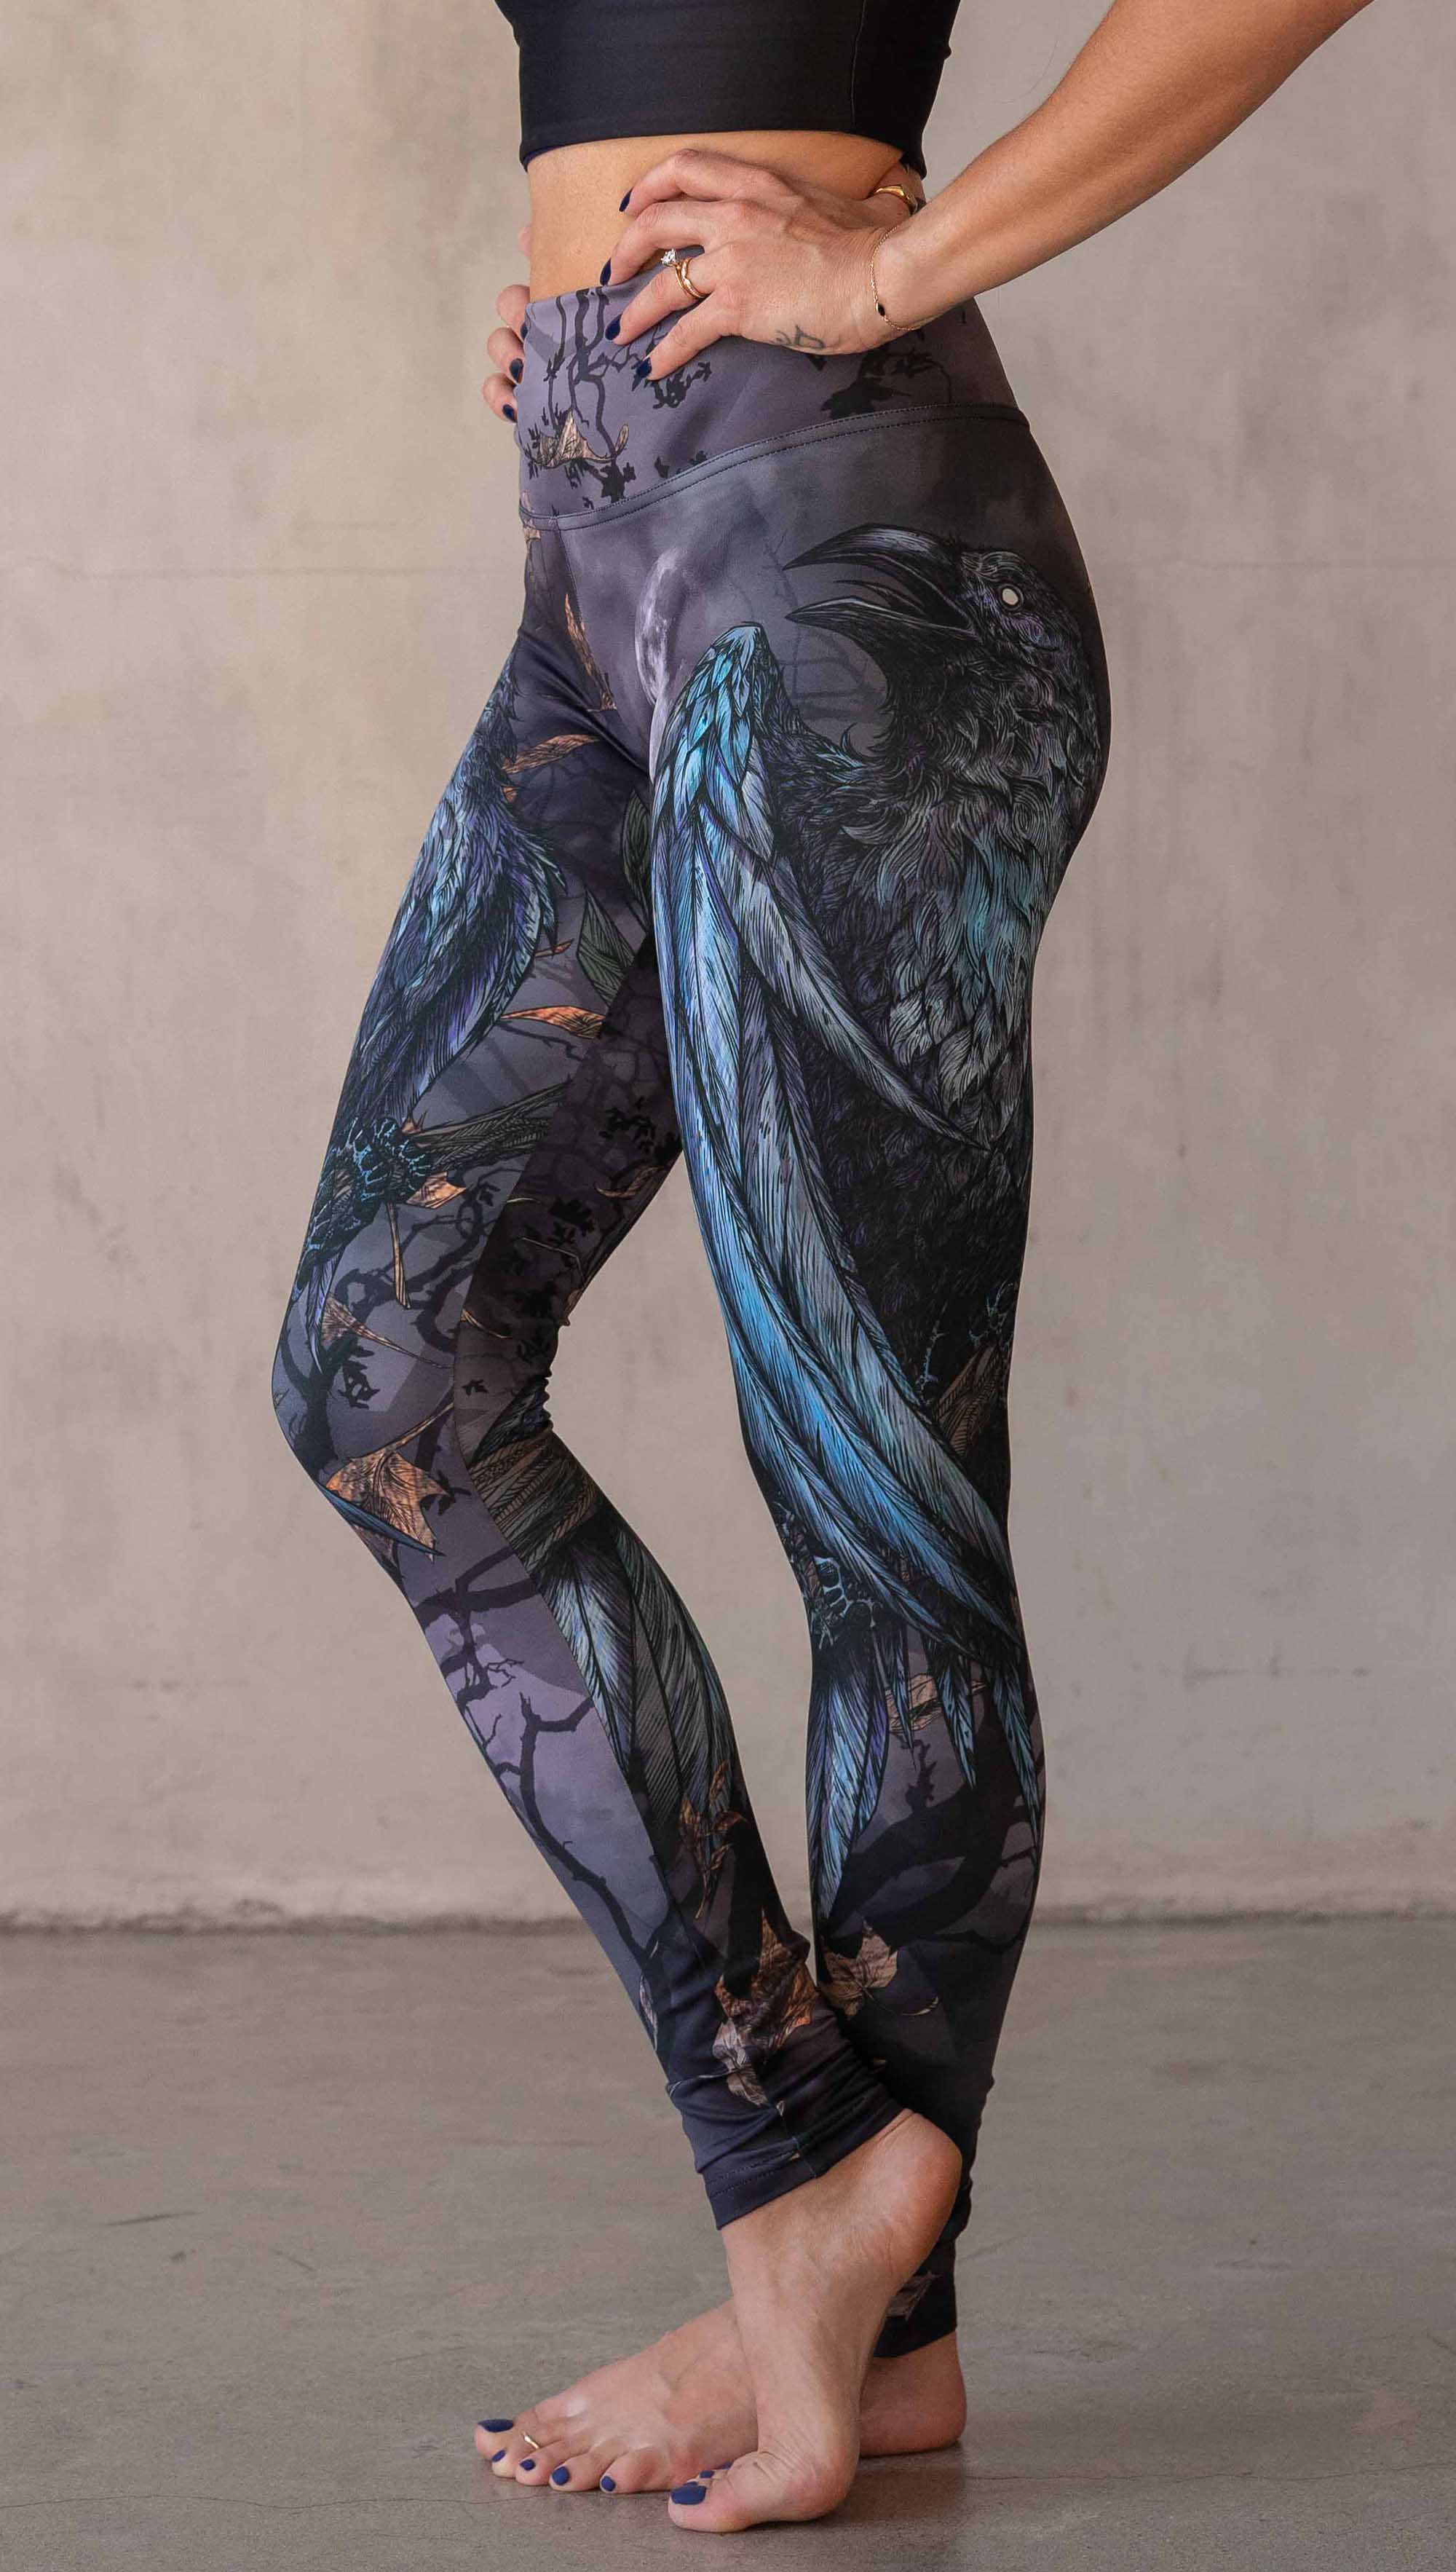 Guess Printed Compression Leggings Review